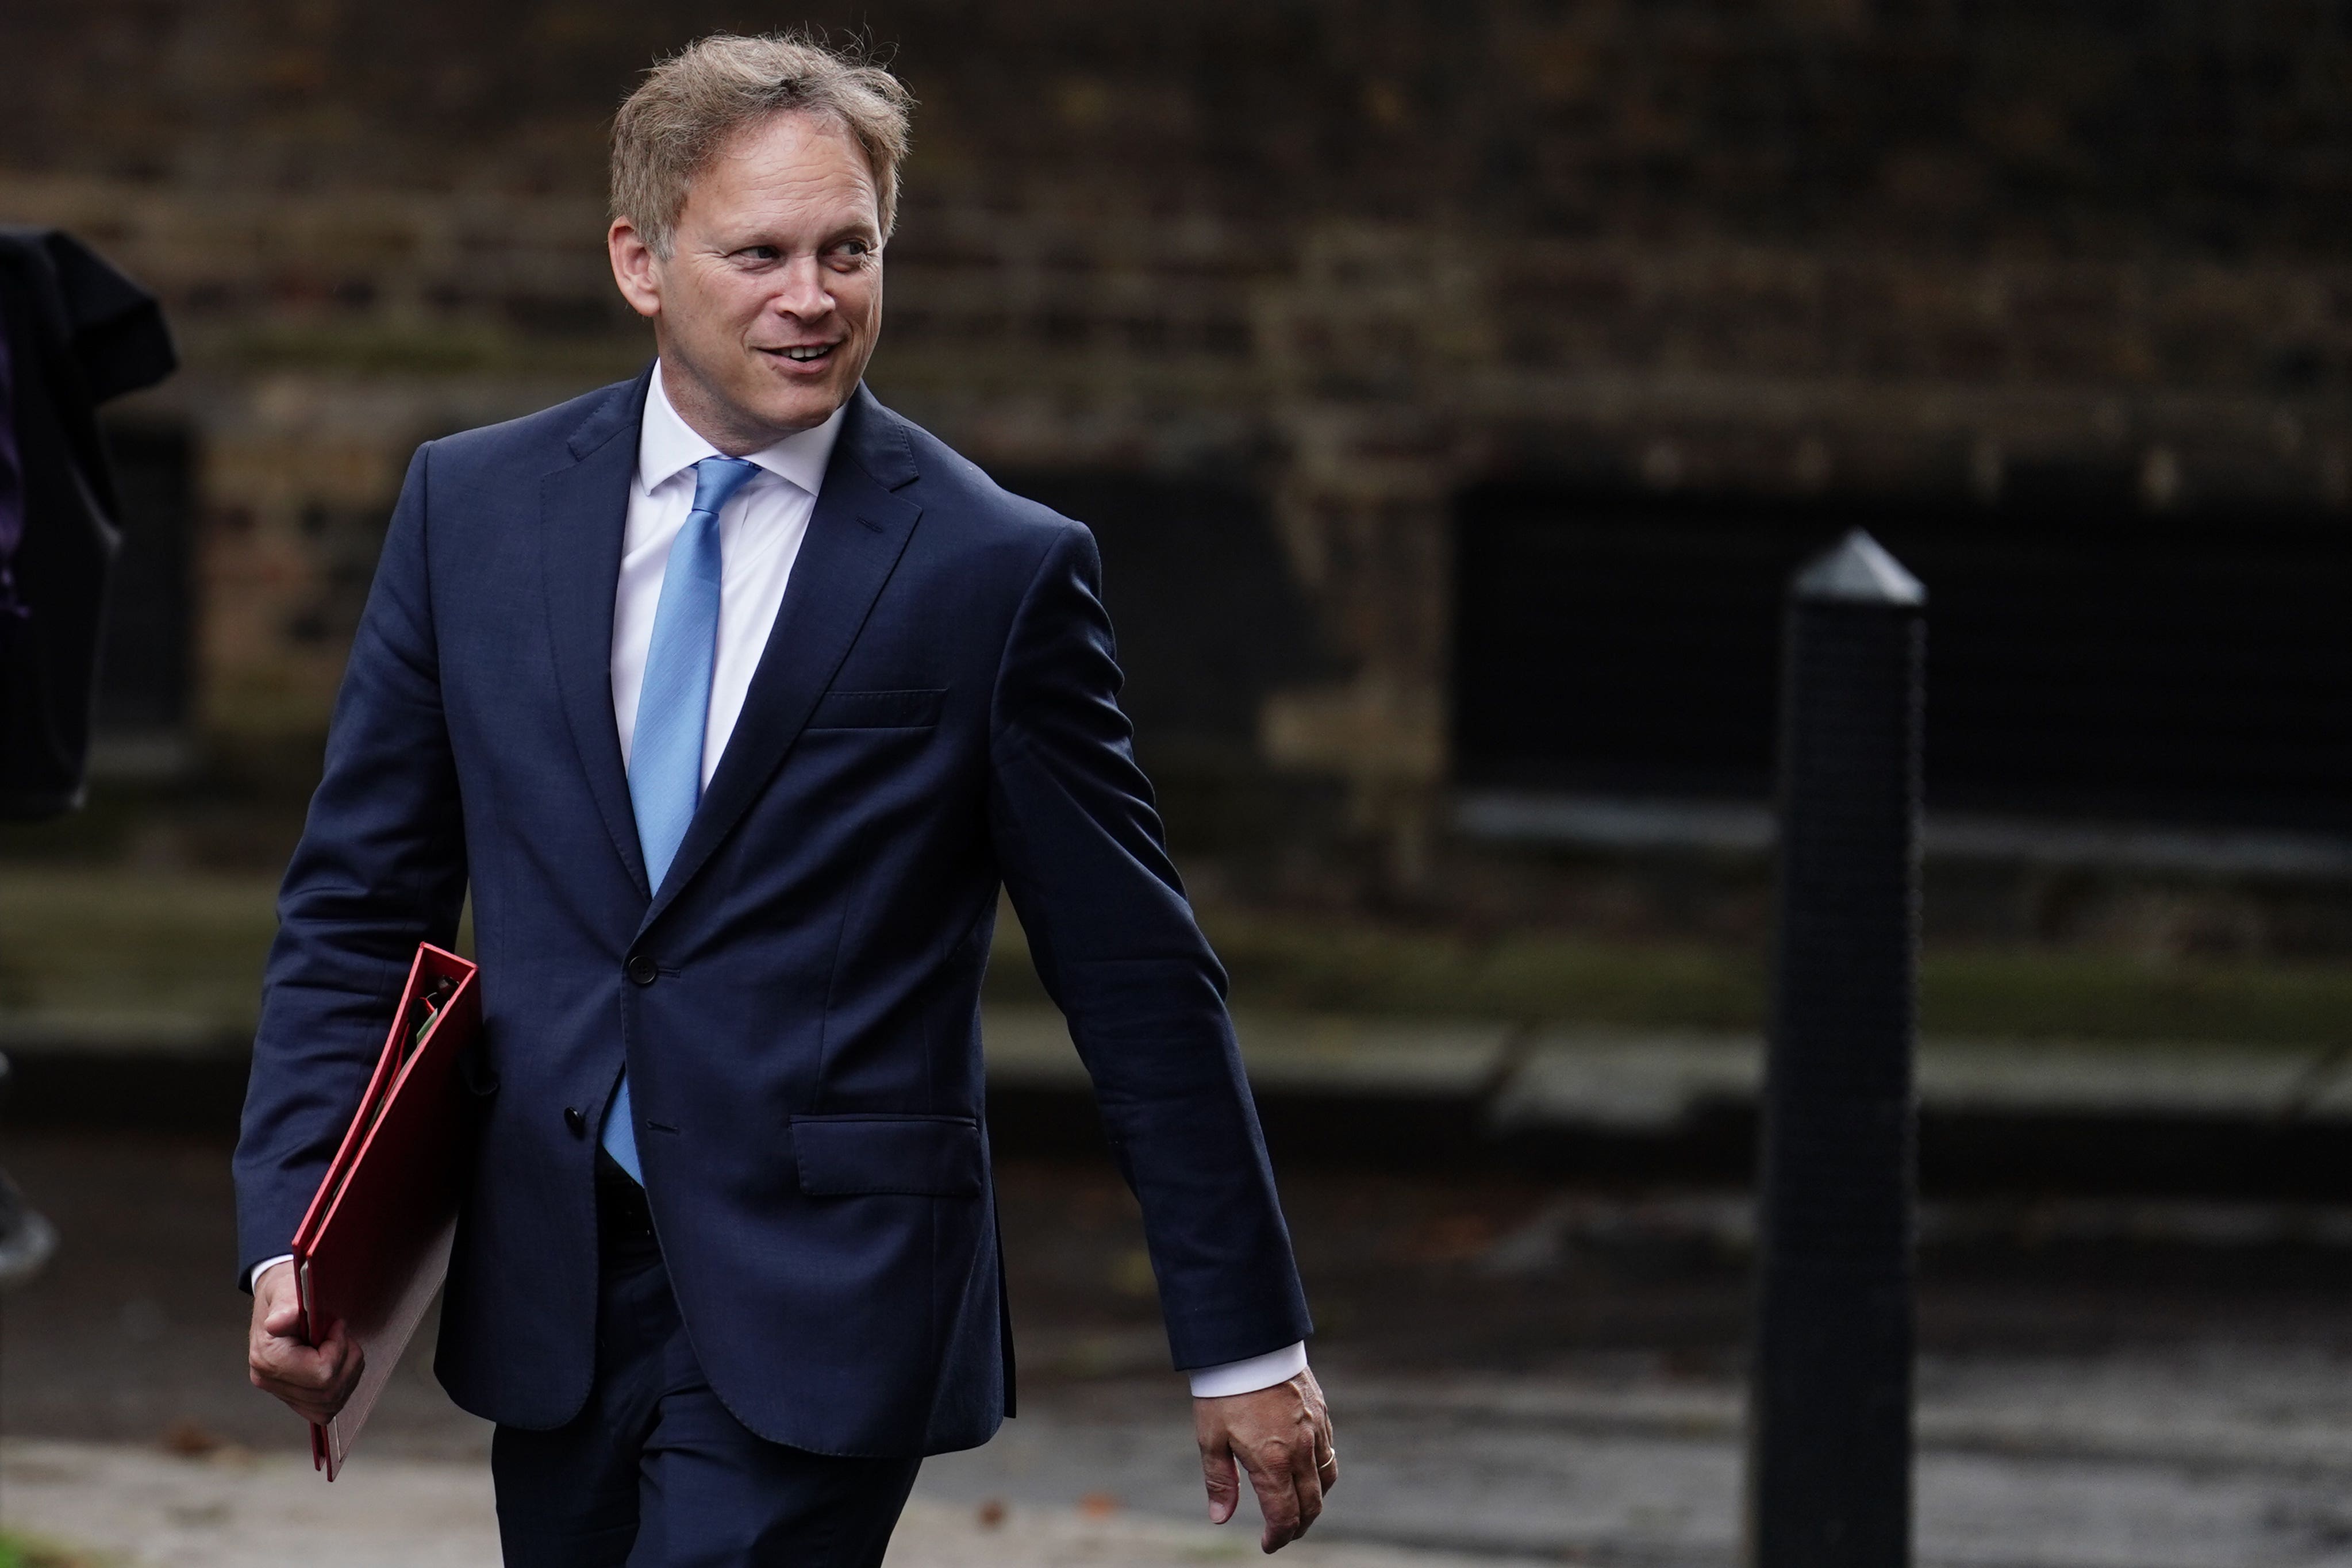 Grant Shapps says the UK’s commitment to protecting lives in the Red Sea is ‘unwavering’